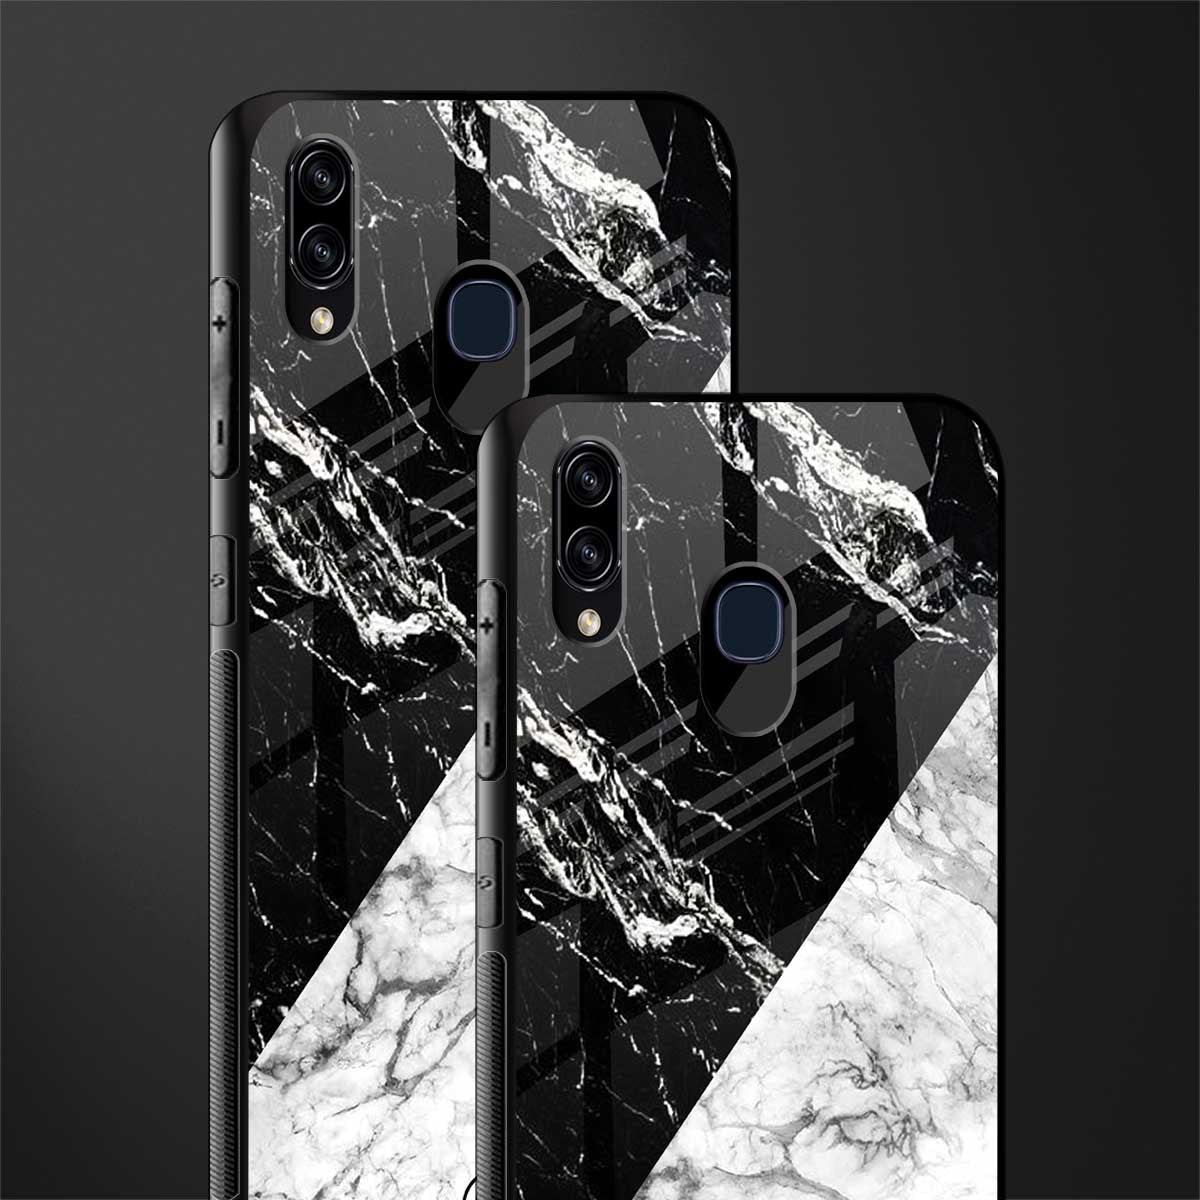 fatal contradiction phone cover for samsung galaxy a30